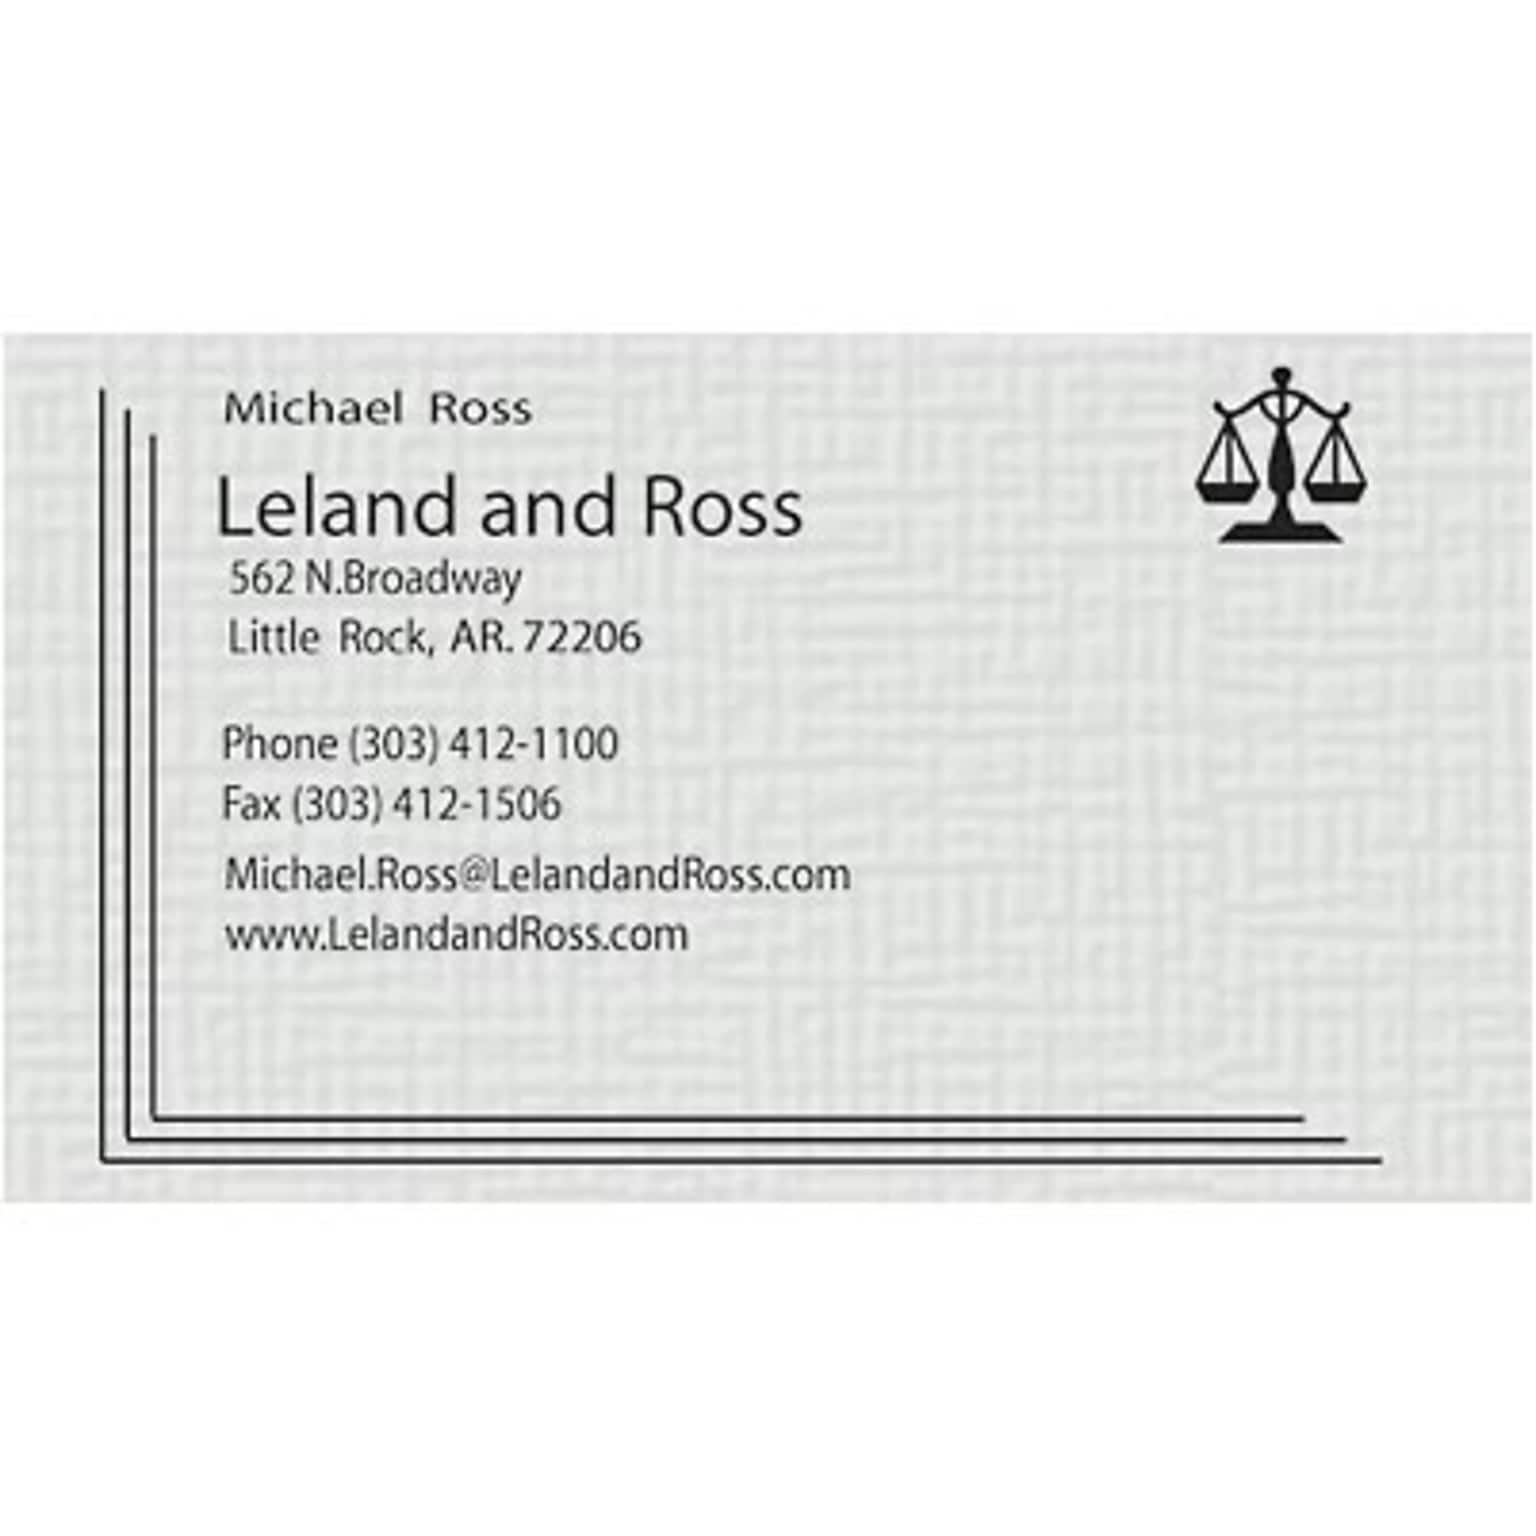 Custom 1-2 Color Business Cards, CLASSIC CREST® Smooth Antique Gray 80#, Raised Print, 2 Custom Inks, 2-Sided, 250/PK